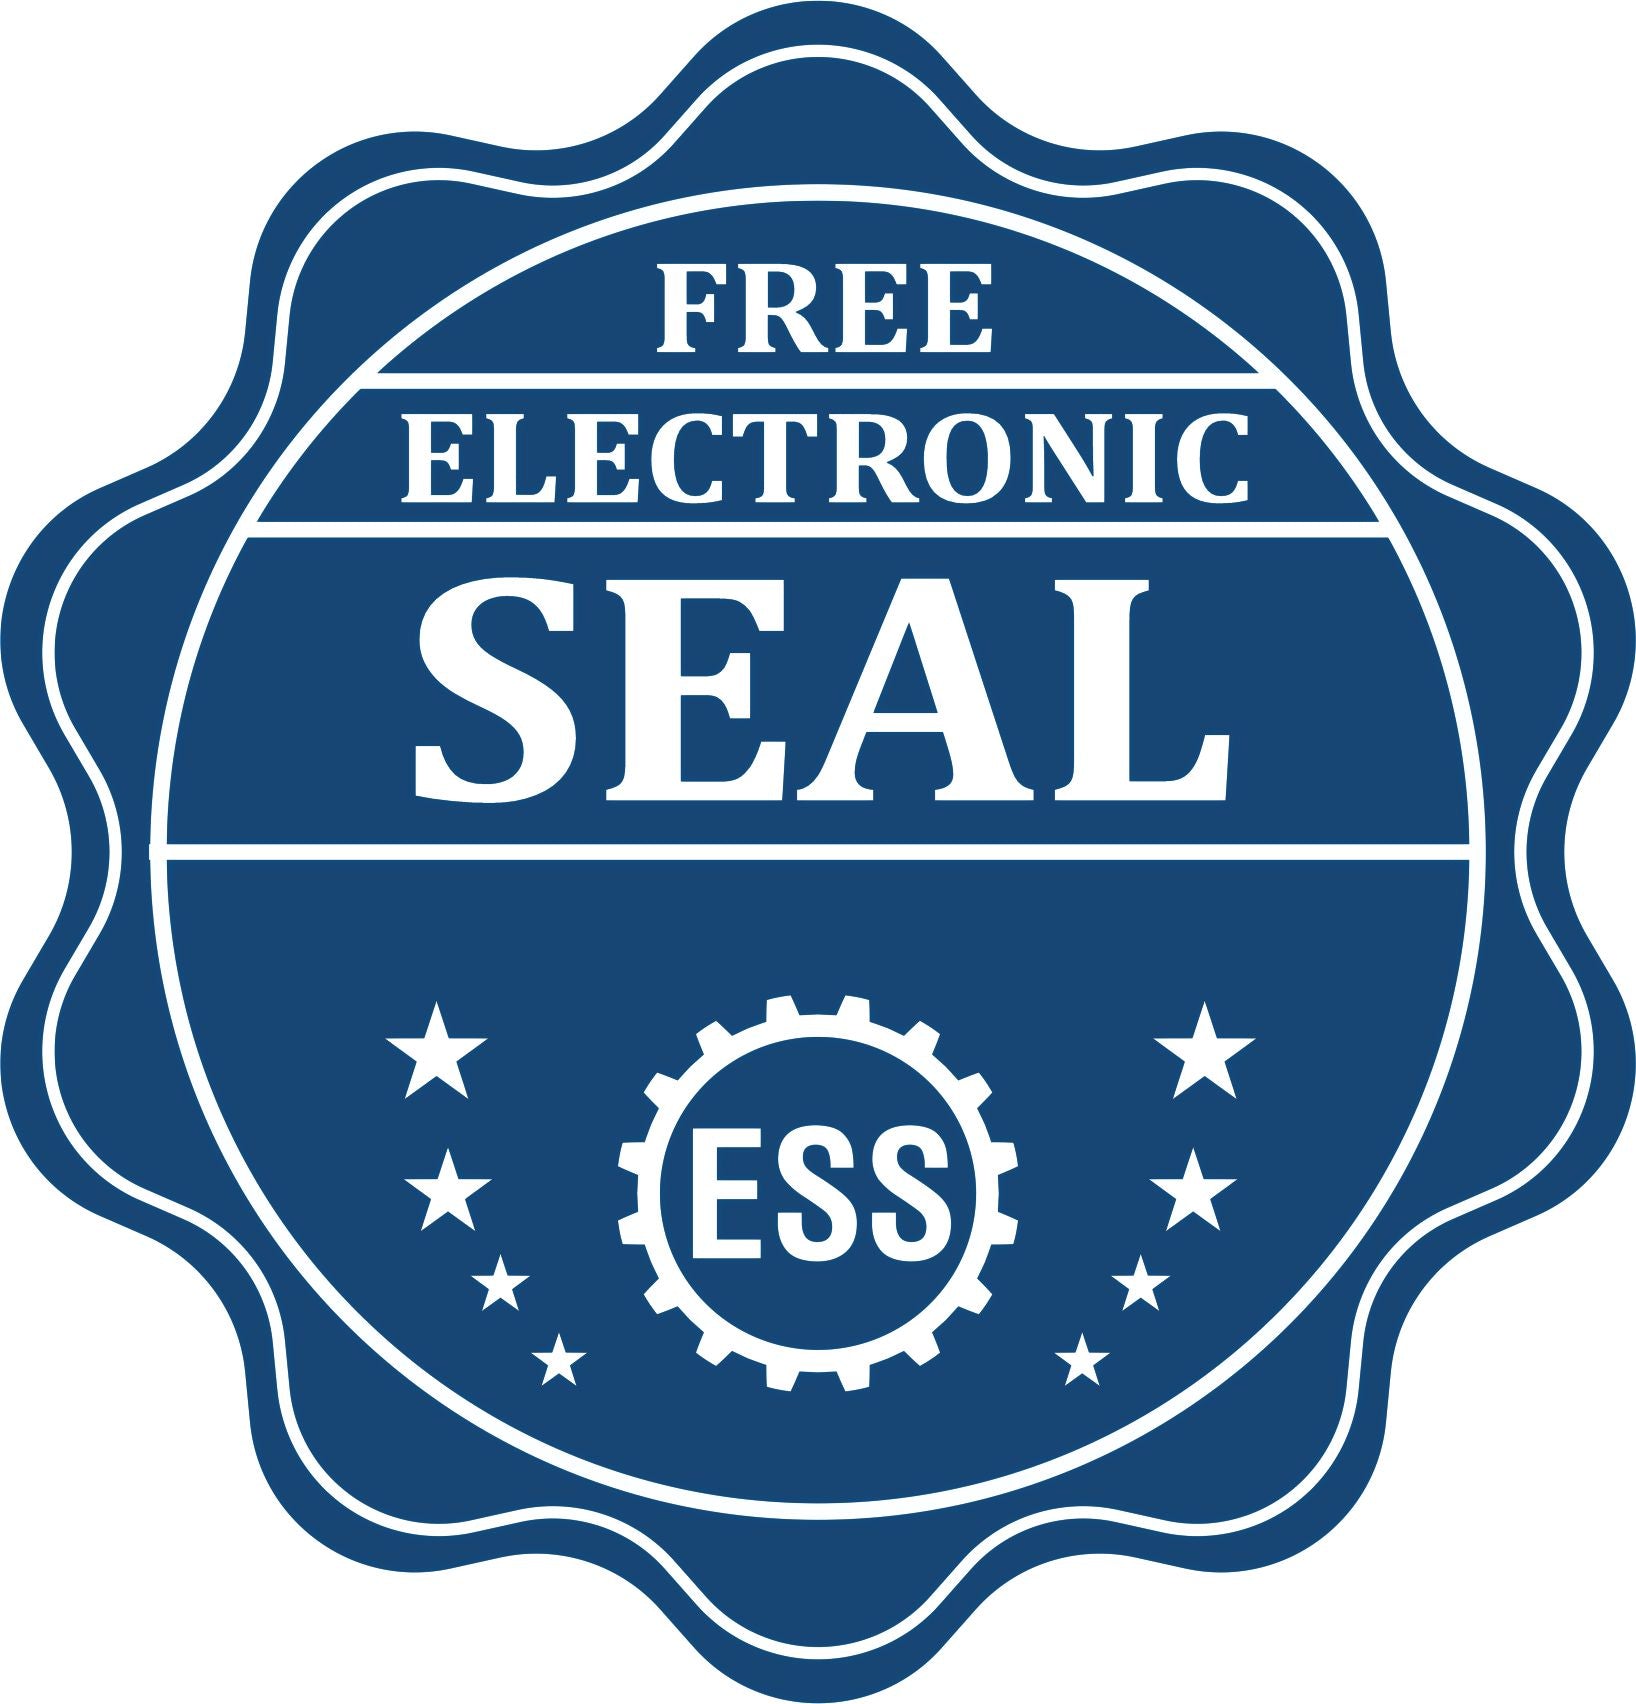 A badge showing a free electronic seal for the Premium MaxLight Pre-Inked Delaware Engineering Stamp with stars and the ESS gear on the emblem.